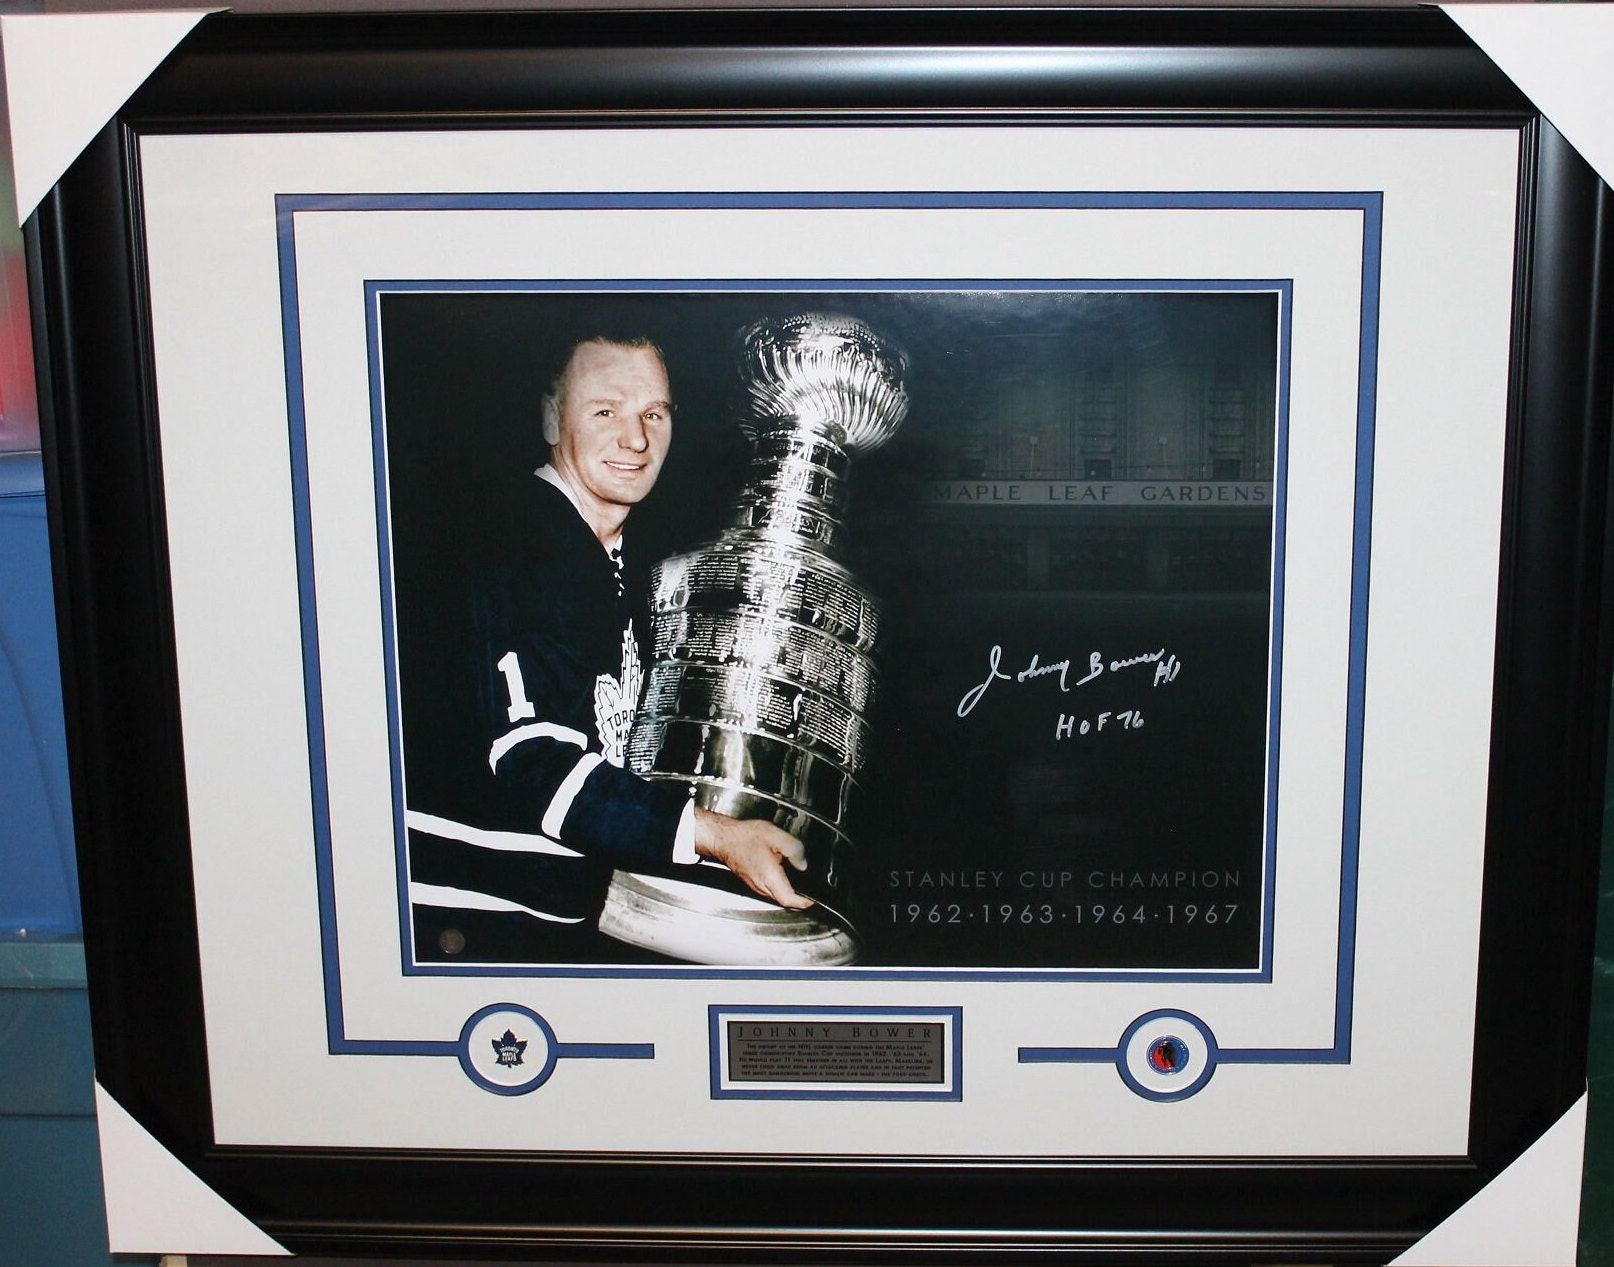 Johnny Bower Signed Autographed Toronto Maple Leafs 1967 Stanley